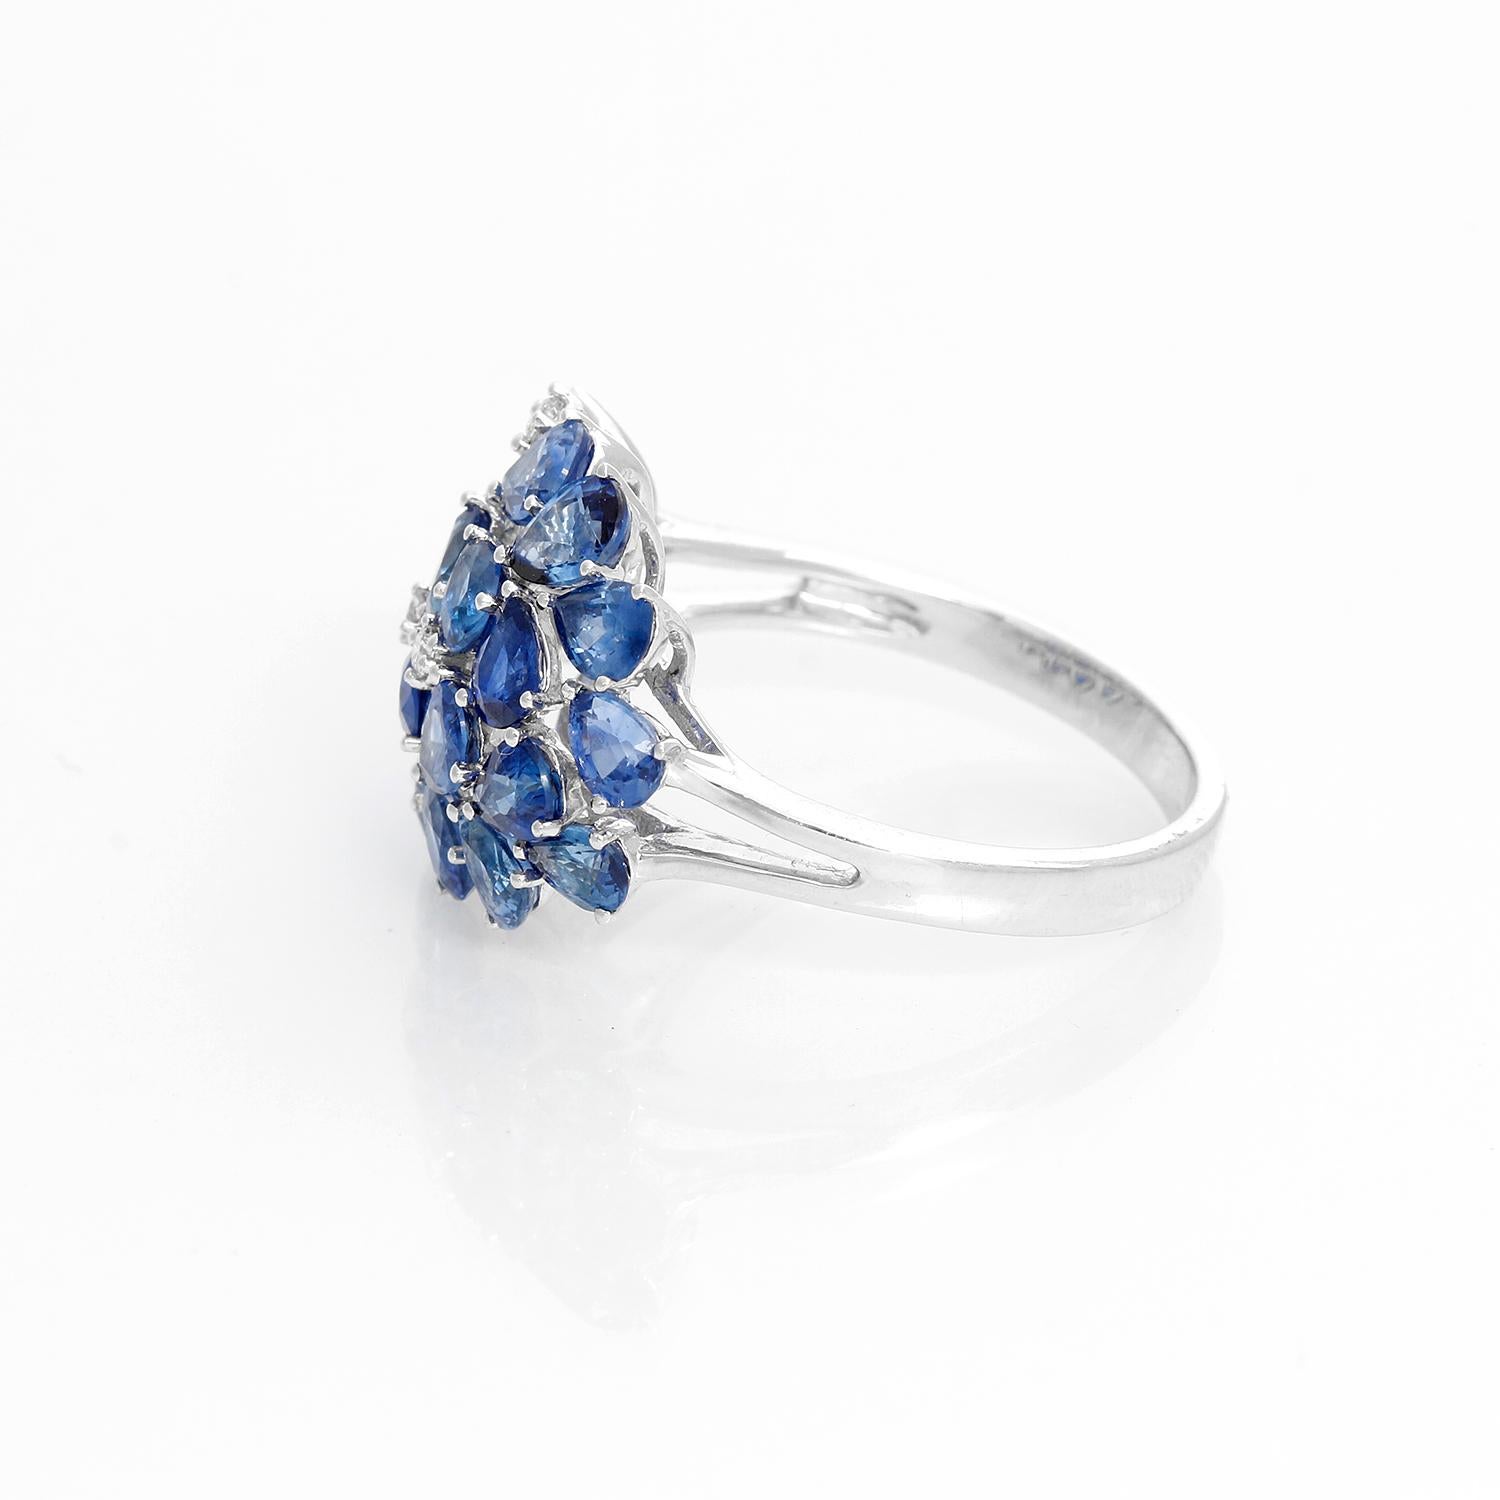 Pear Sapphire and Diamond 14K White Gold Ring Size 8 - Cluster Sapphire ring with 4.48 cts. A few hints of diamond peek from within the bouquet of blue stones. Crafted in 14K white gold with 0.07 carats of diamond accent. Size 8 but can be sized.